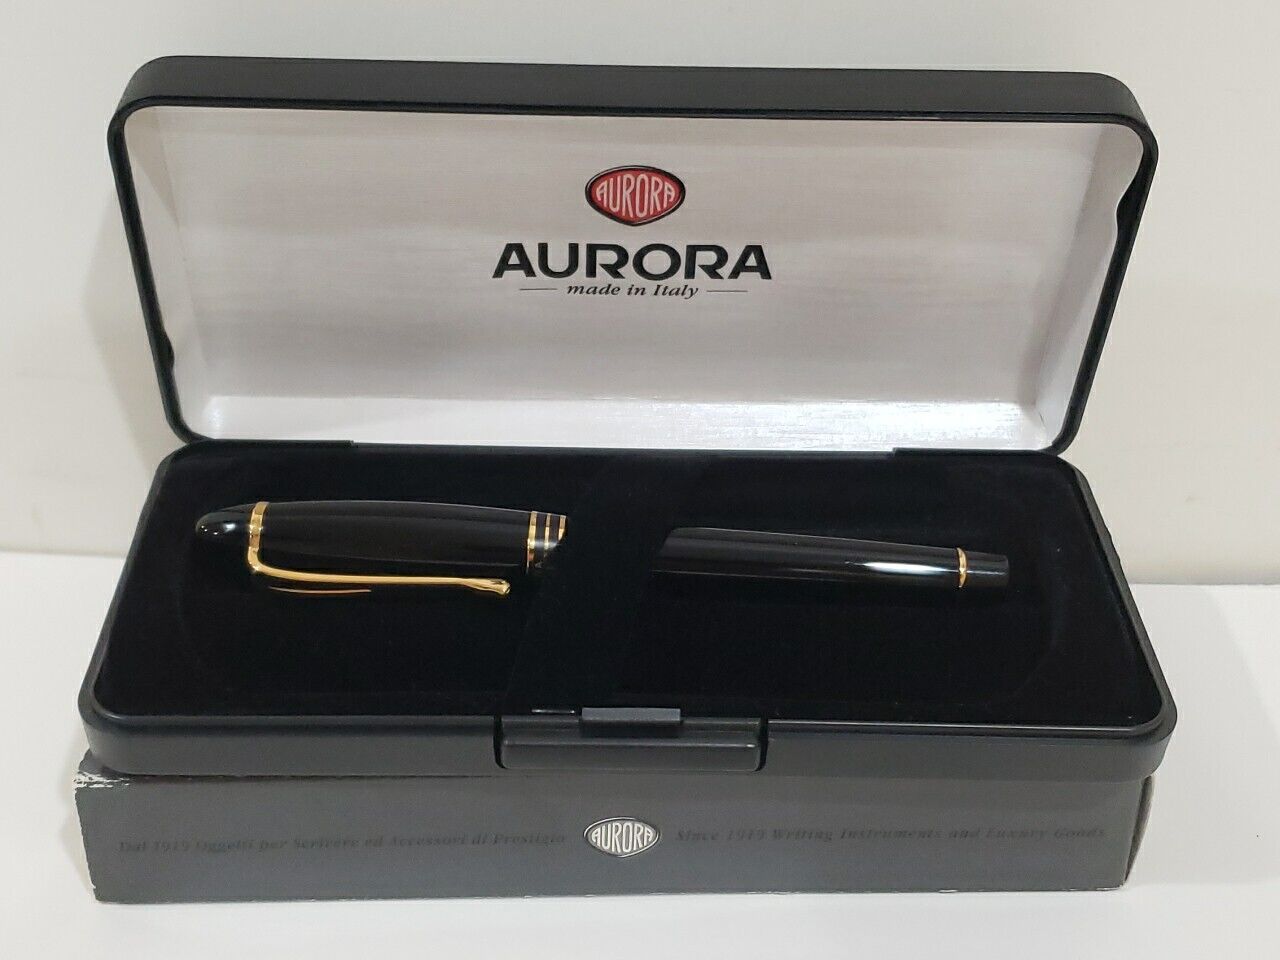 AURORA Roller Pen B71 Black Gold Plated Trims Never Used but Needs New Ink